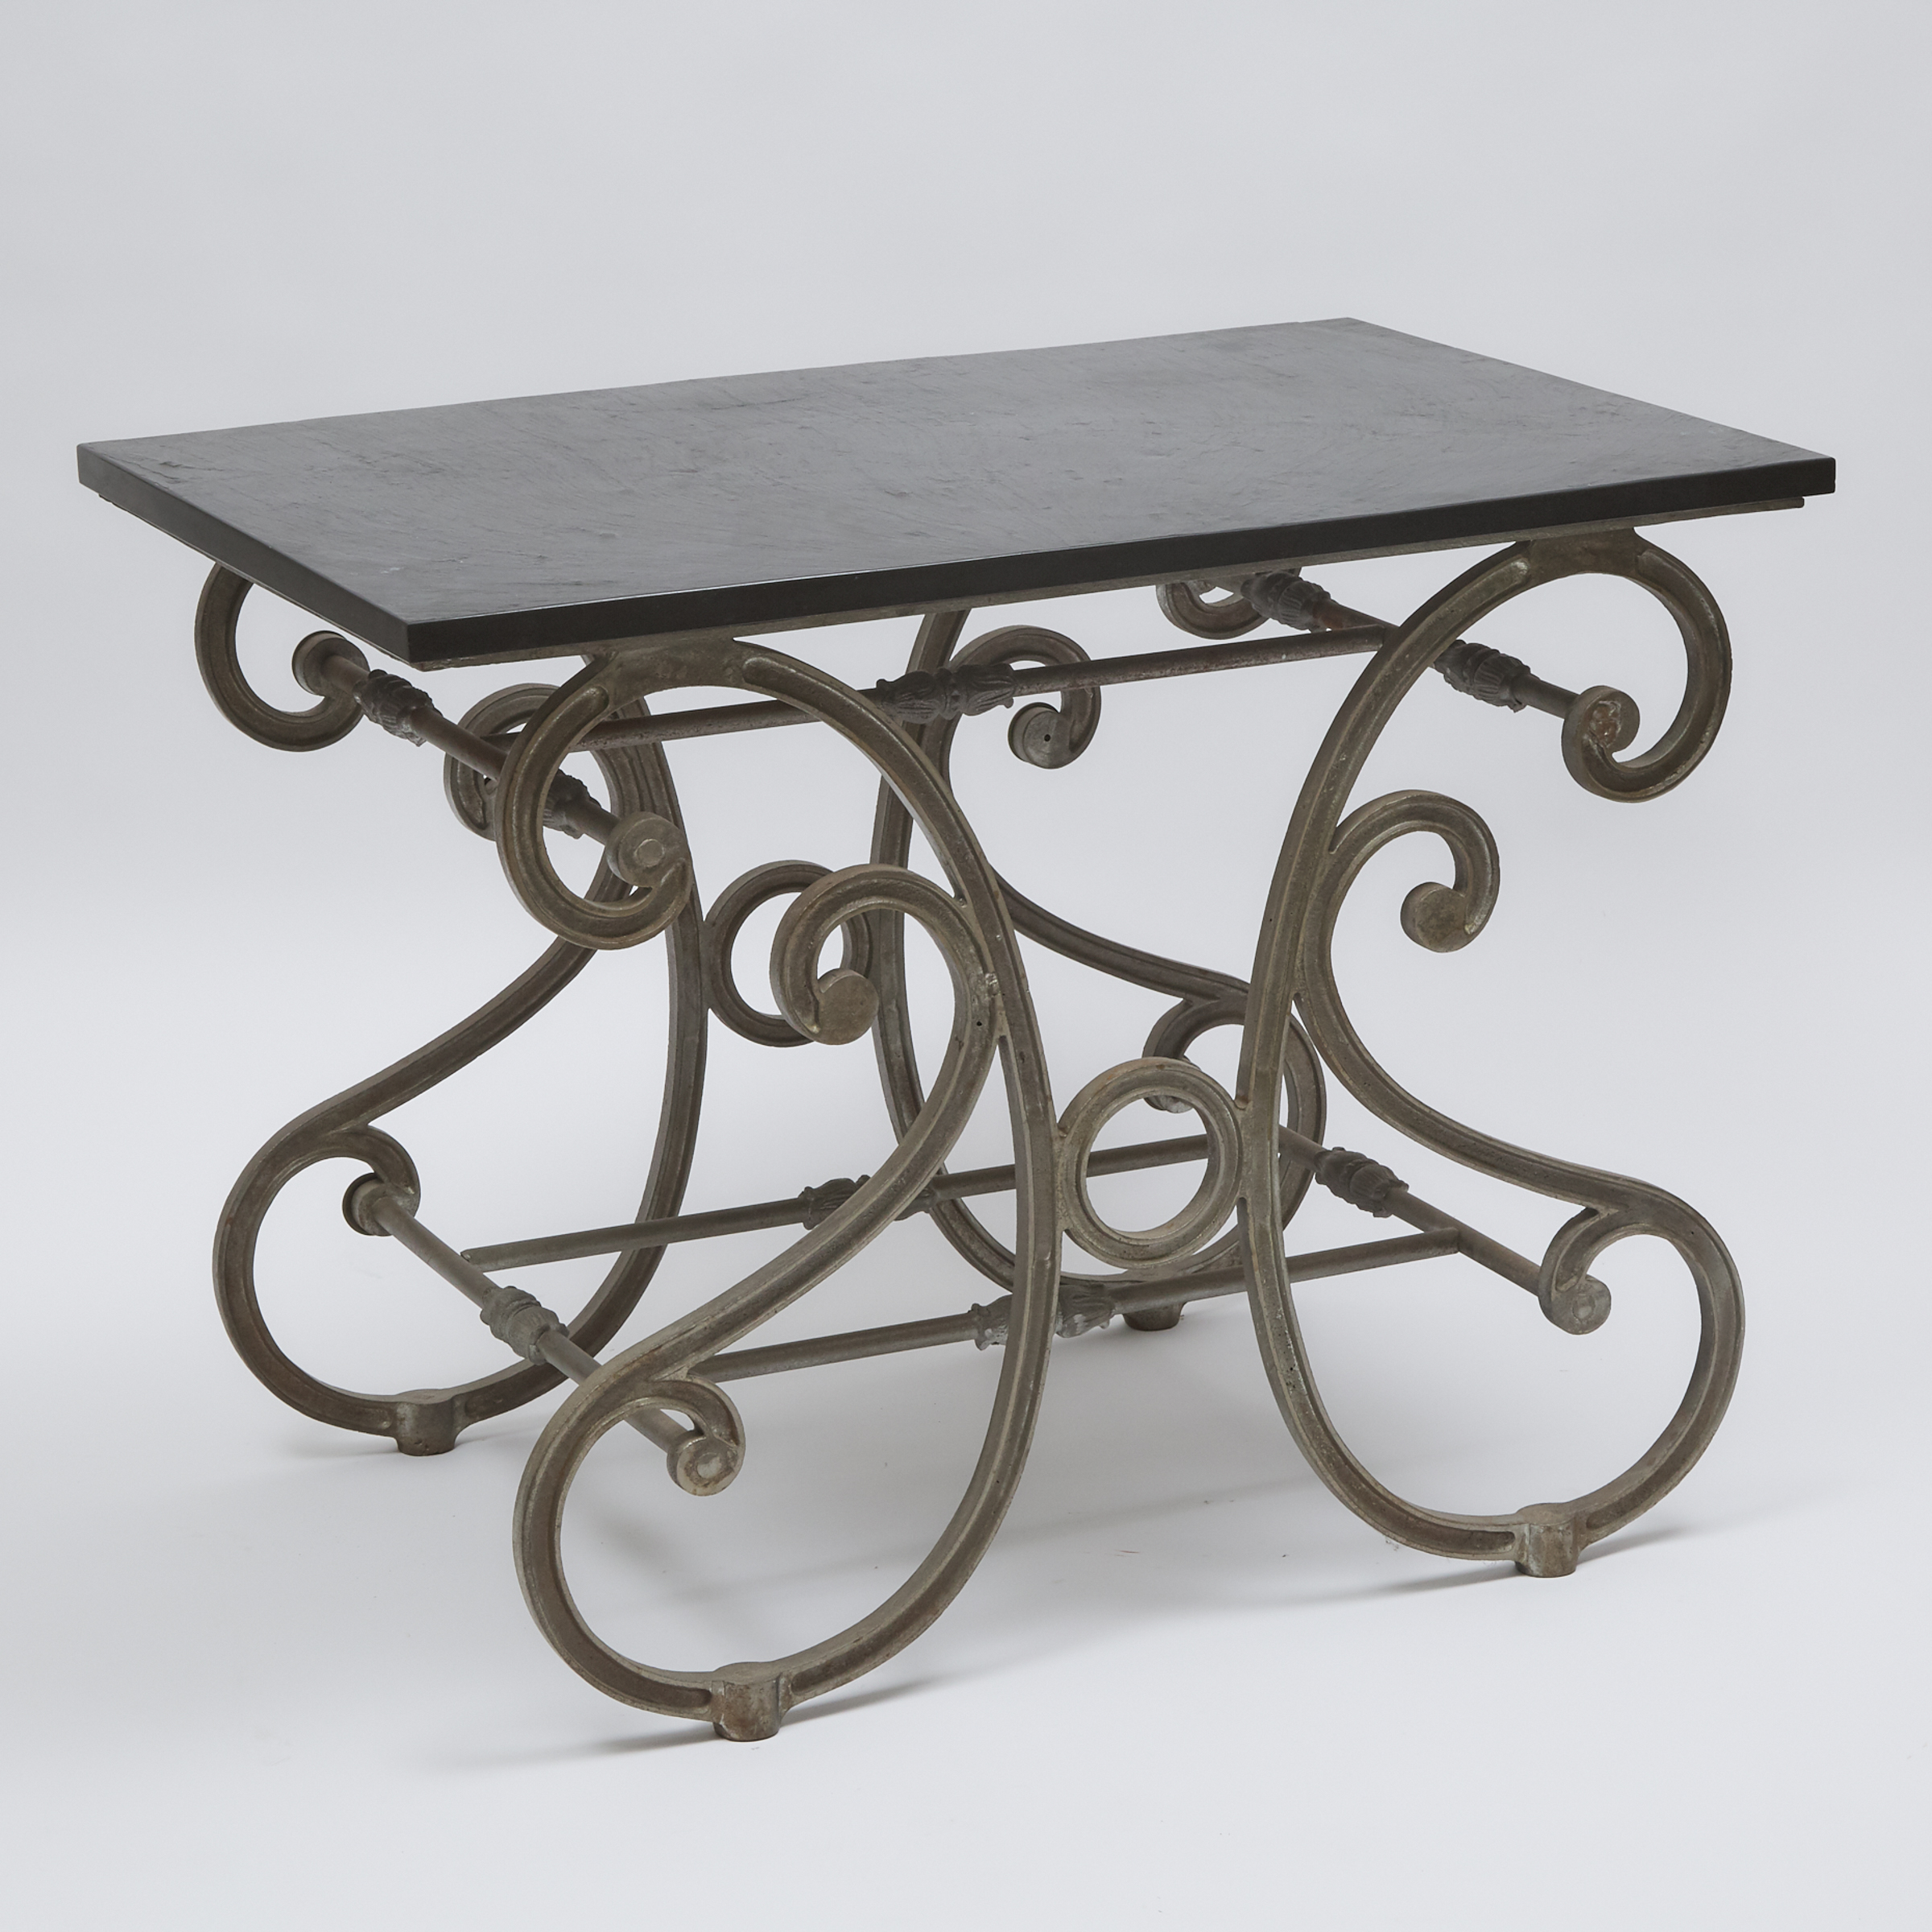 French Iron, Brass and Slate Baker's Table, 20th century